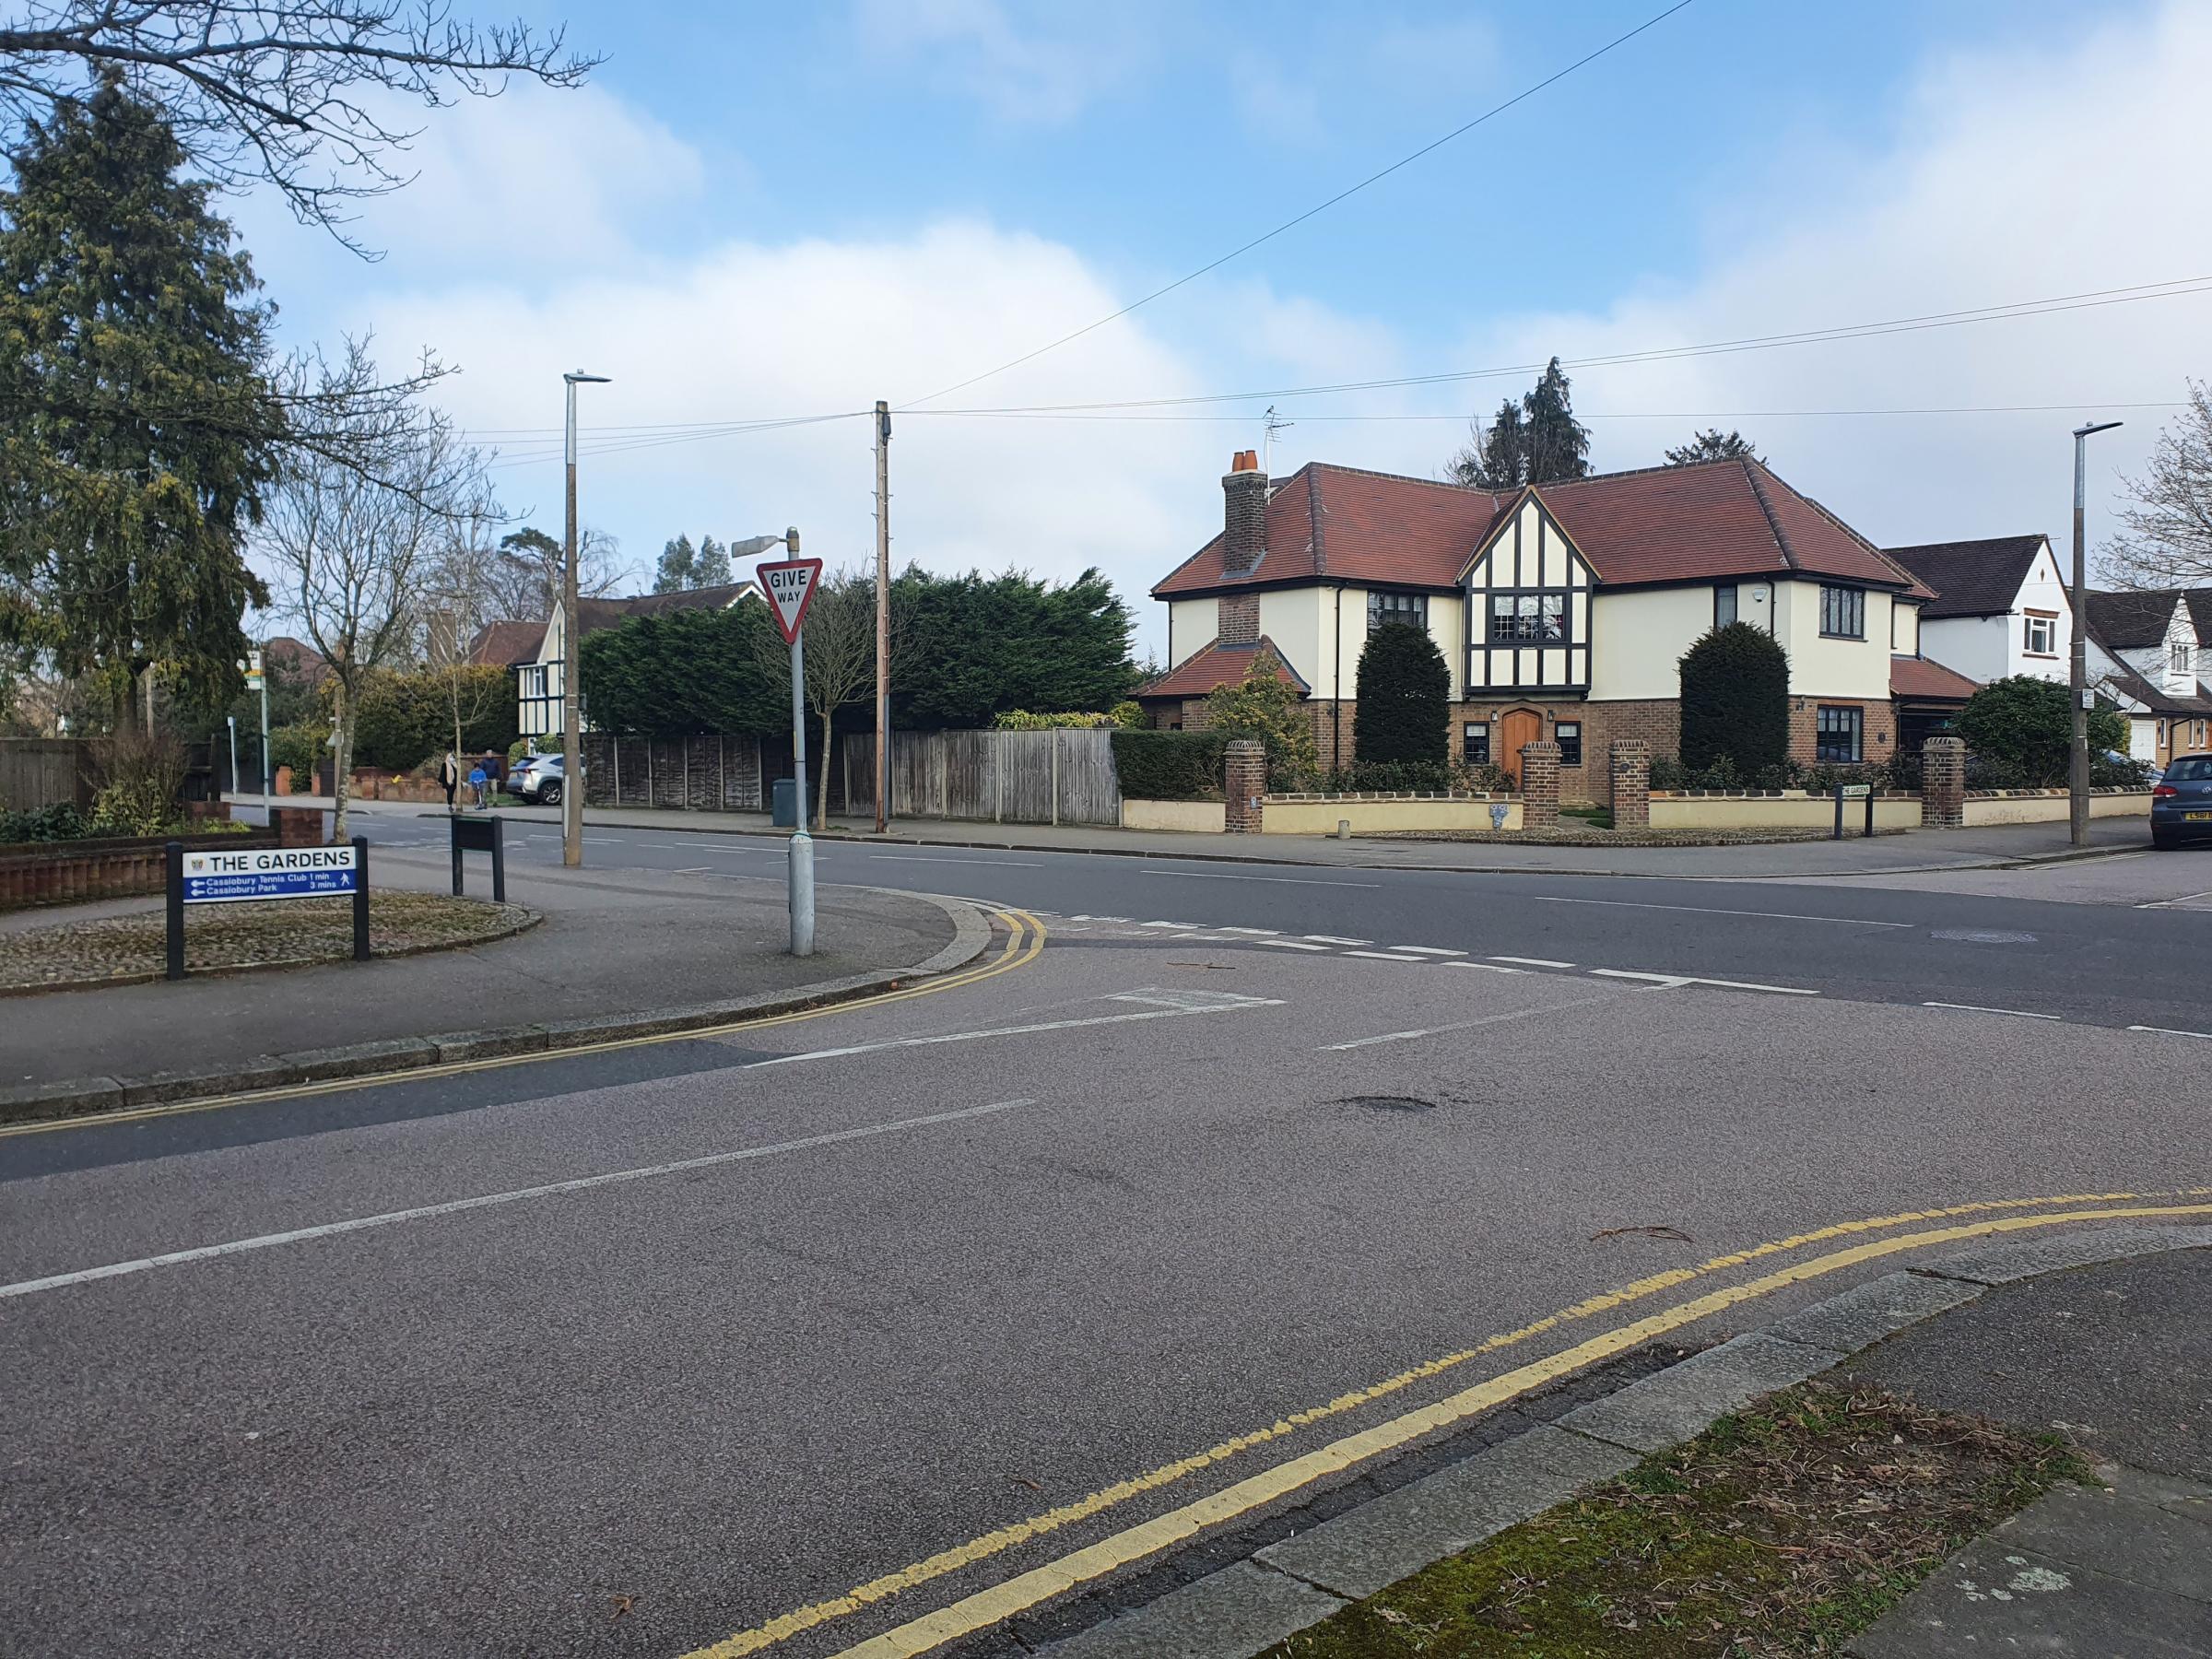 Crossroads of Cassiobury Drive and The Gardens where a blockage could be put in place to stop through traffic